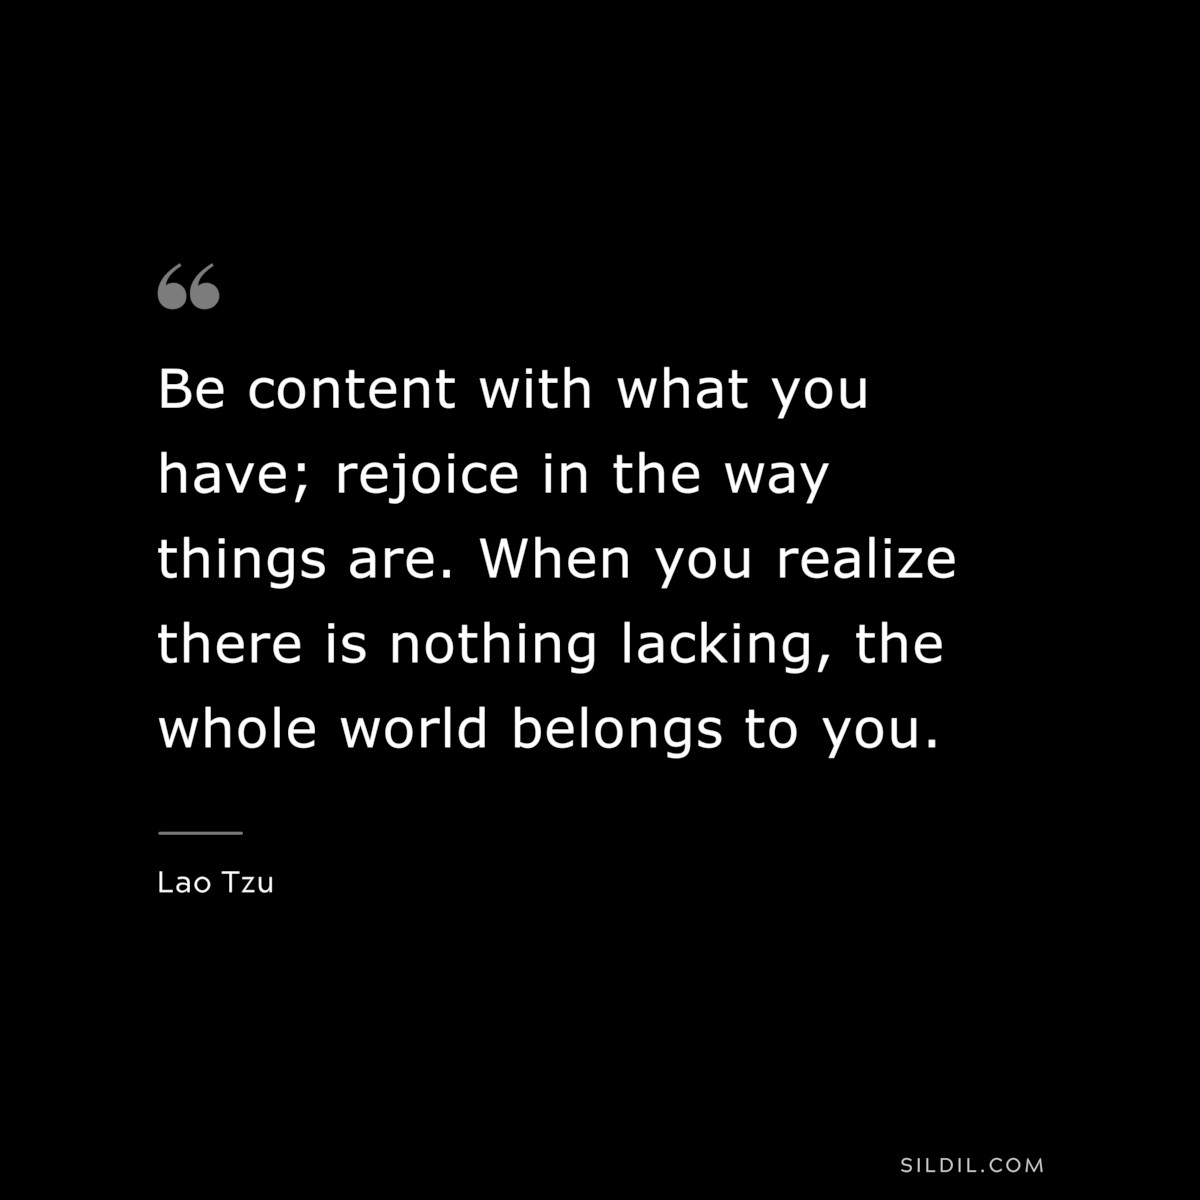 Be content with what you have; rejoice in the way things are. When you realize there is nothing lacking, the whole world belongs to you. ― Lao Tzu